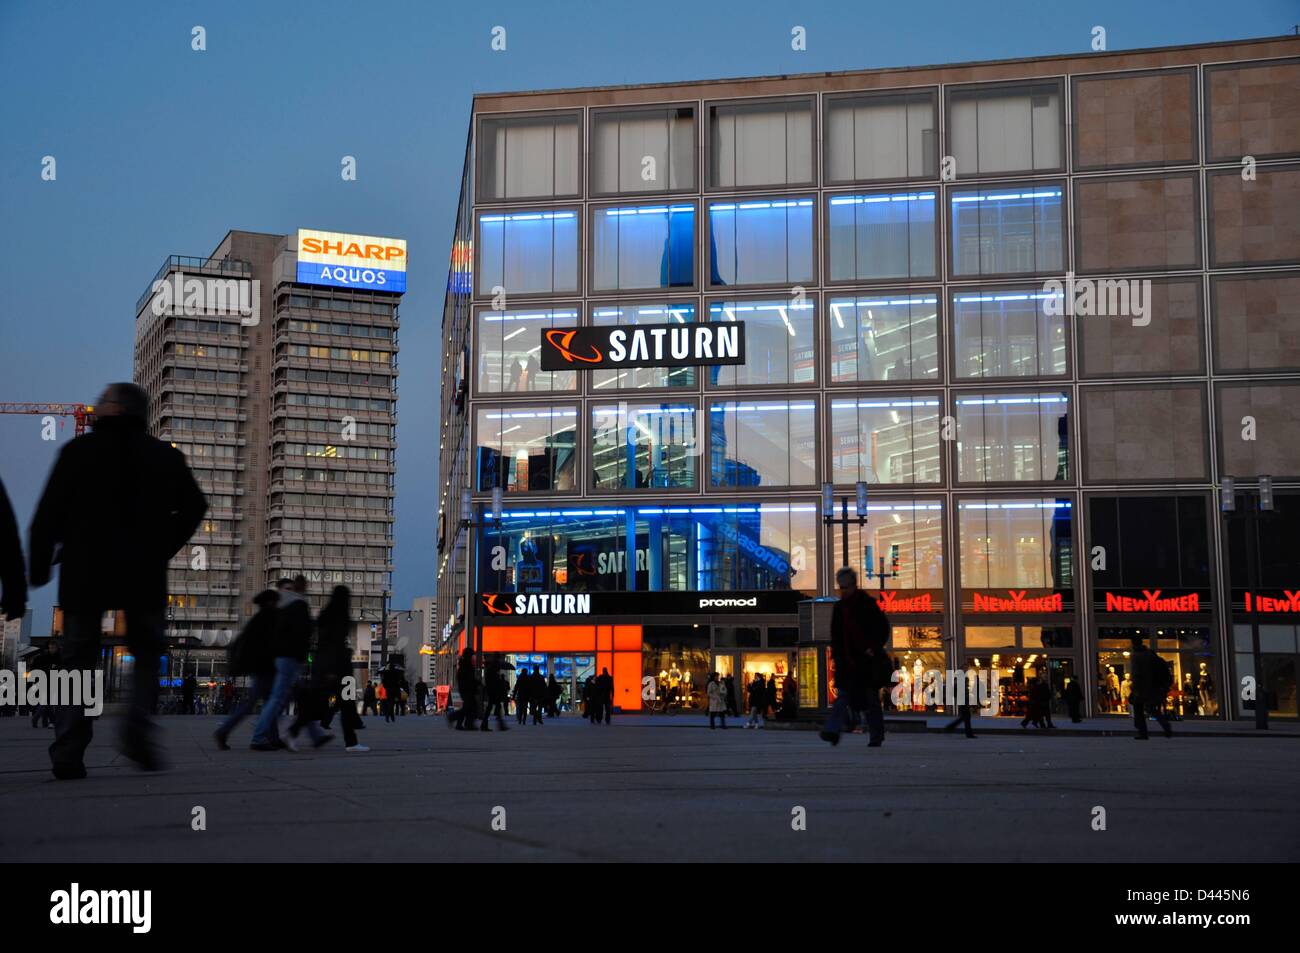 People walk in front of a branch of the consumer electronics retailer Saturn at Alexanderplatz in Berlin, Germany, 7 March 2011. In the background, the Haus des Reisens (House of Traveling) is pictured with the neon writing 'Sharp Aquos'. During the GDR era, the building housed the GDR travel agent 'Interflug'. Fotoarchiv für ZeitgeschichteS.Steinach Stock Photo